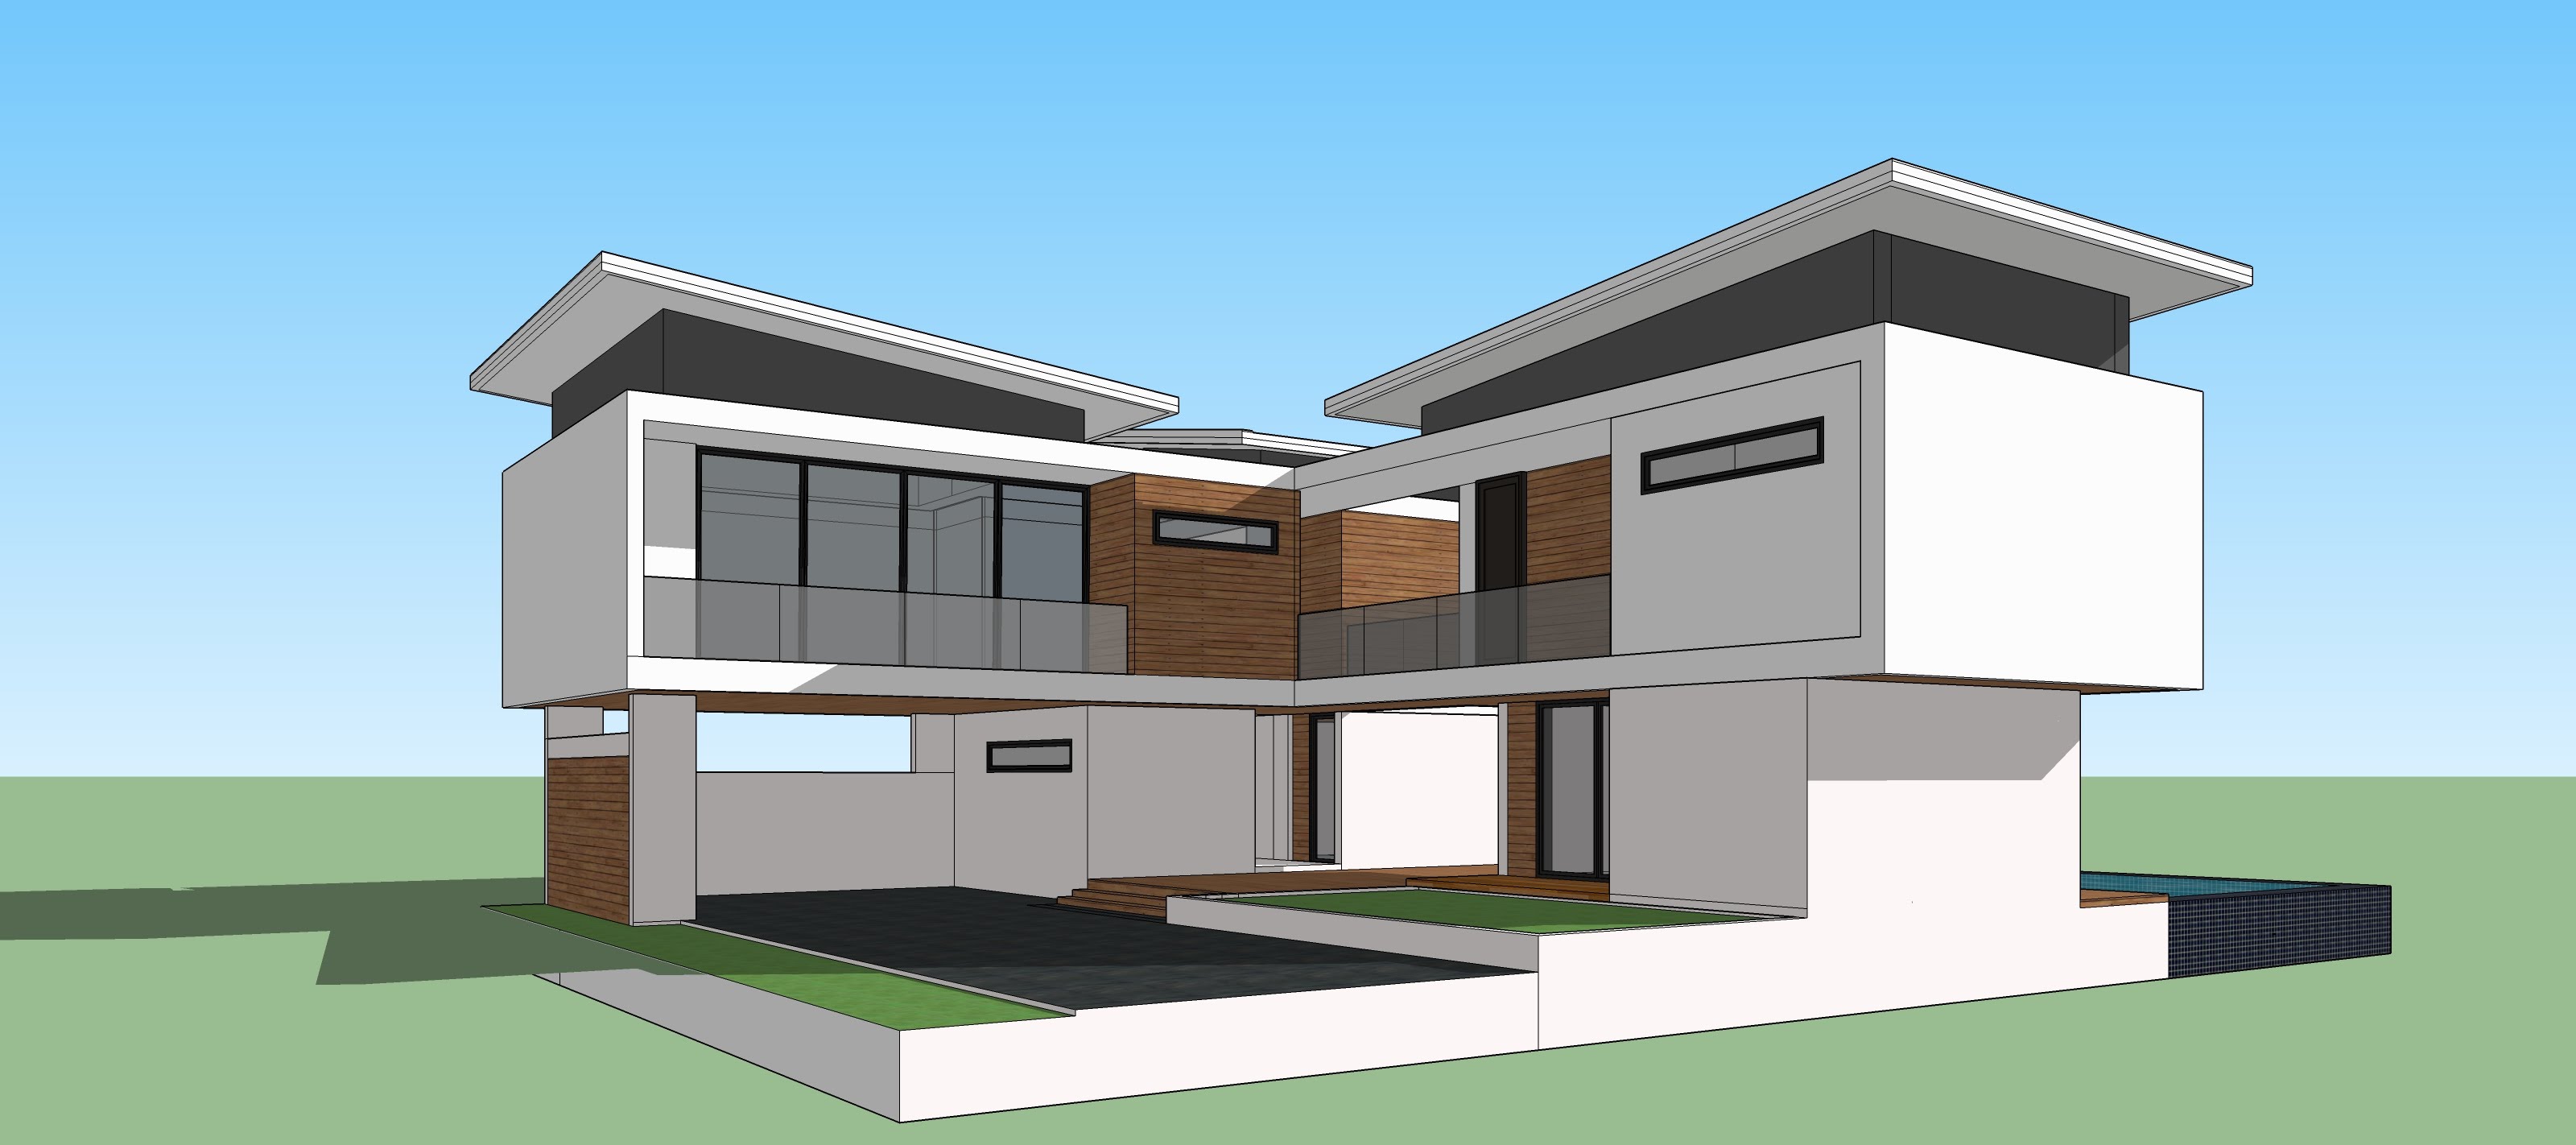 Sketchup paintings search result at PaintingValley com